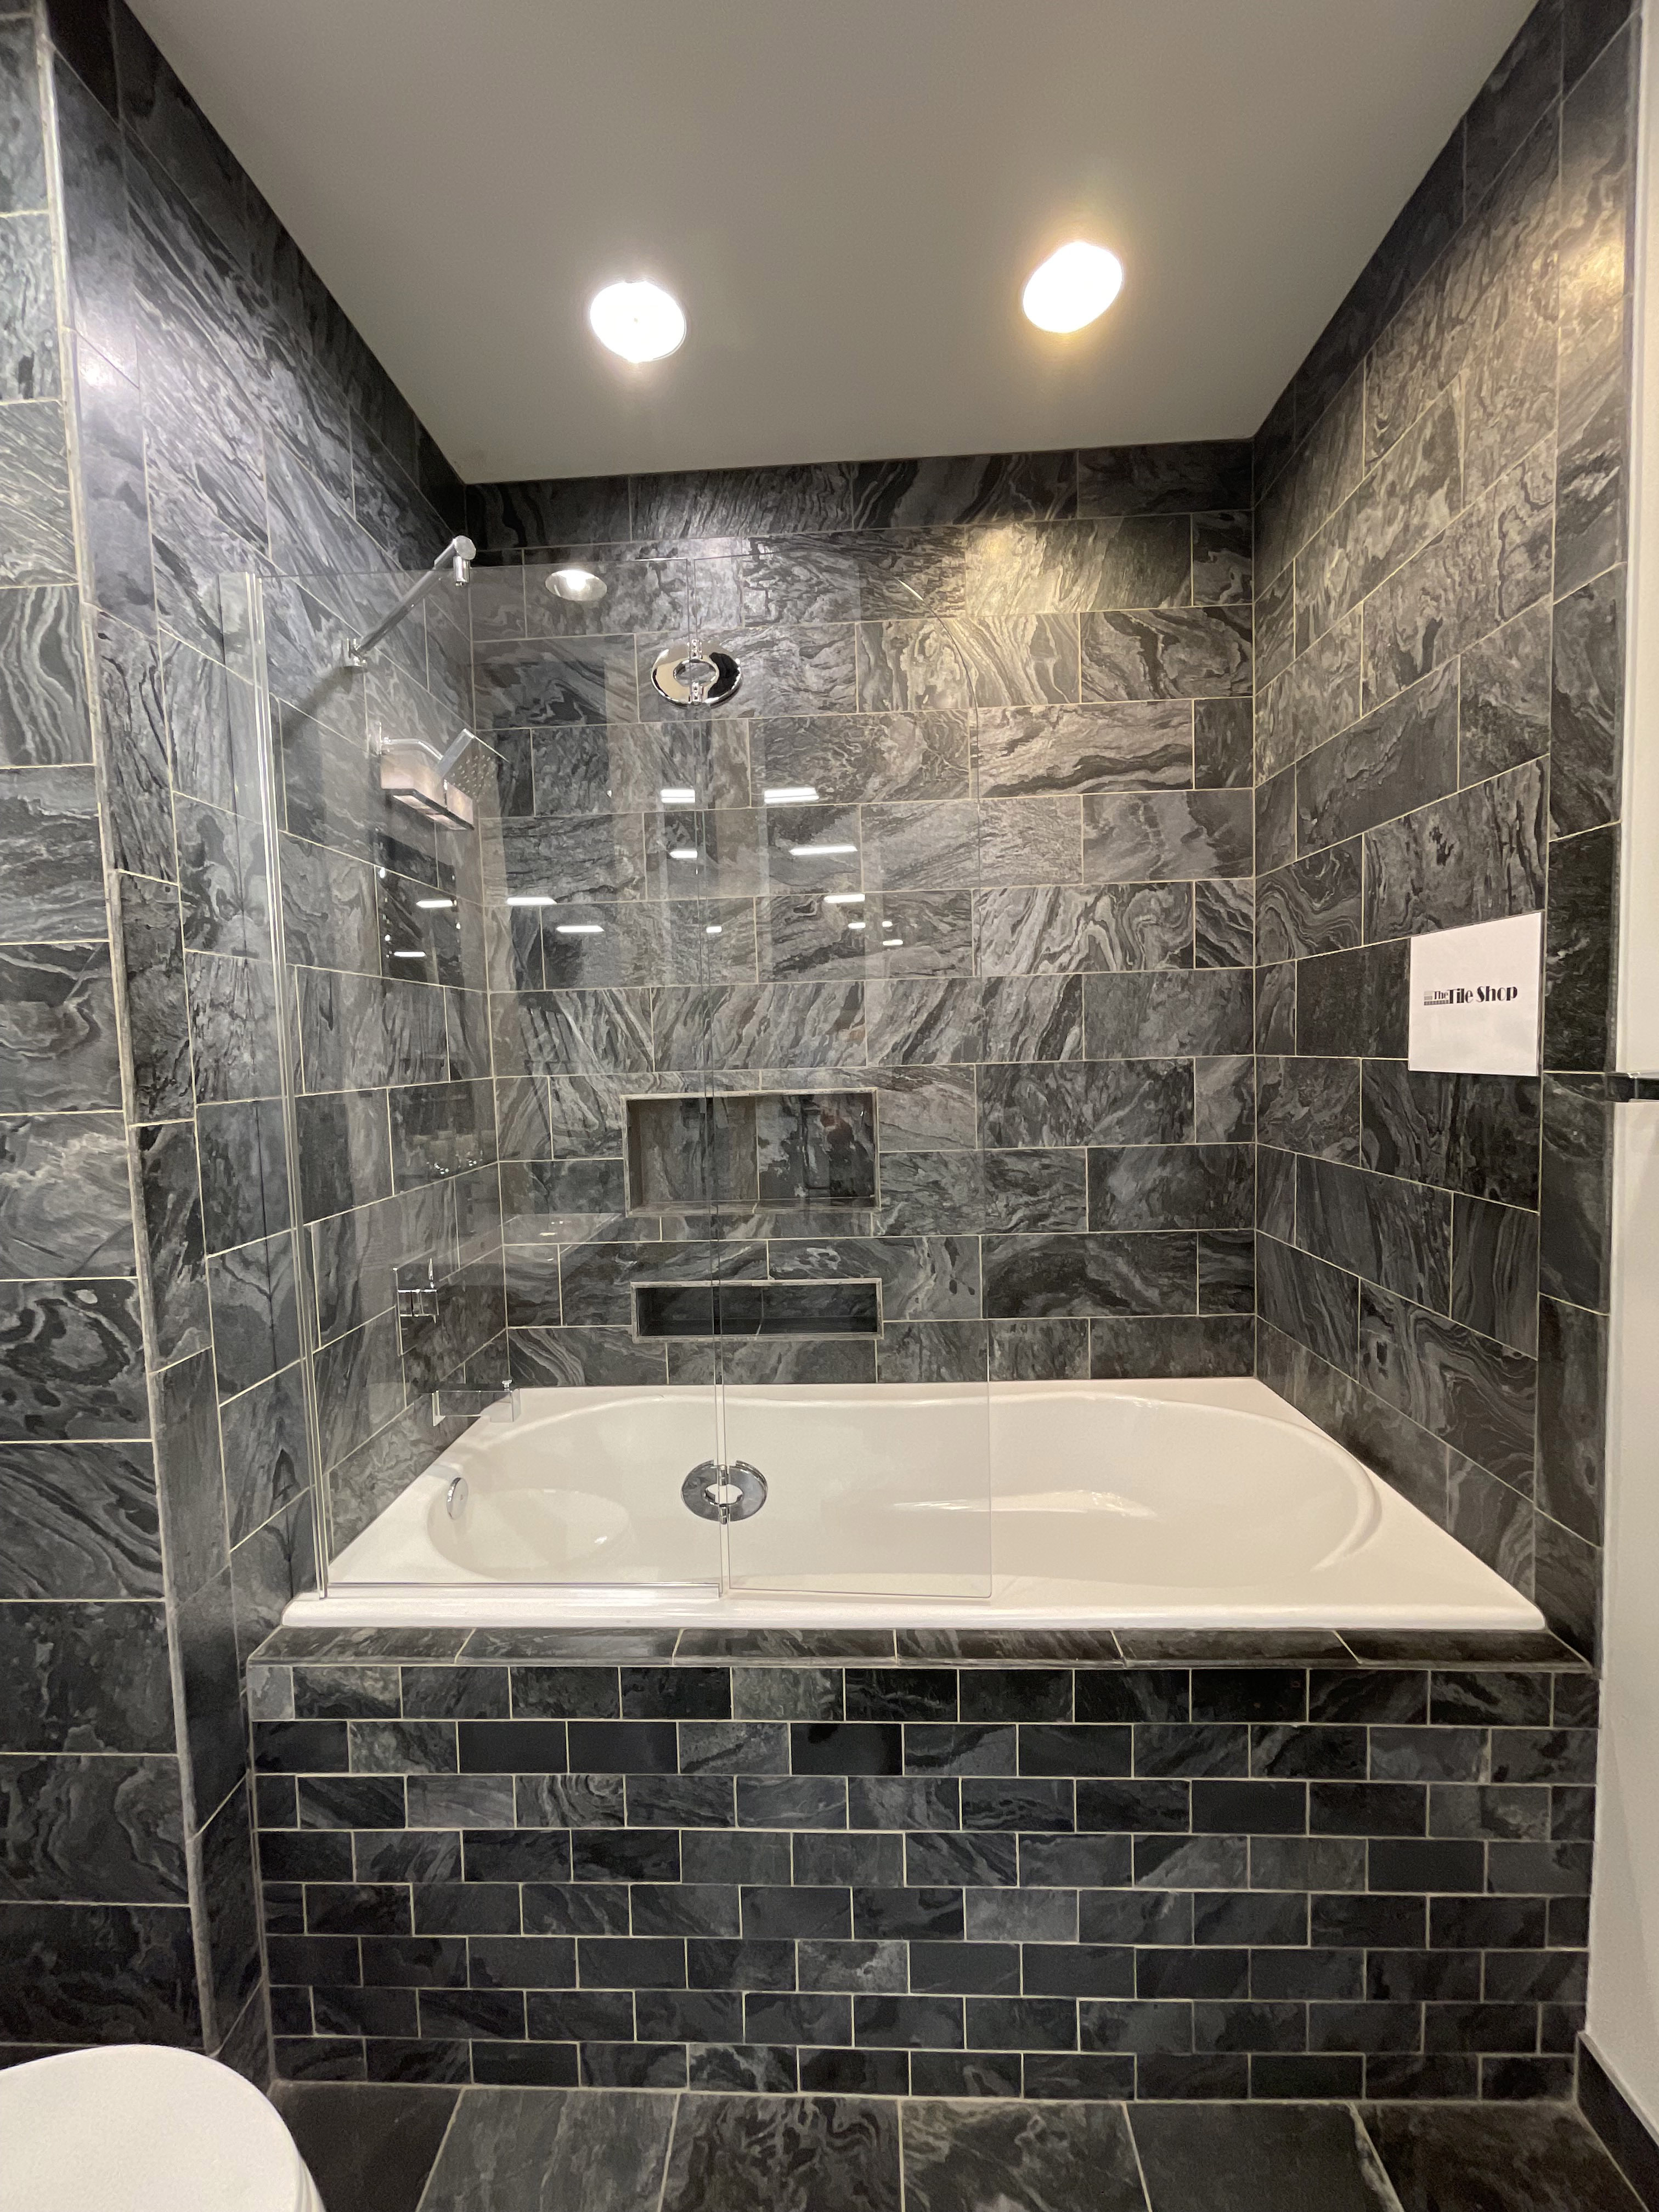 Bathroom Remodeling in Pittsburgh: A Great Way to Increase Your Home's Value